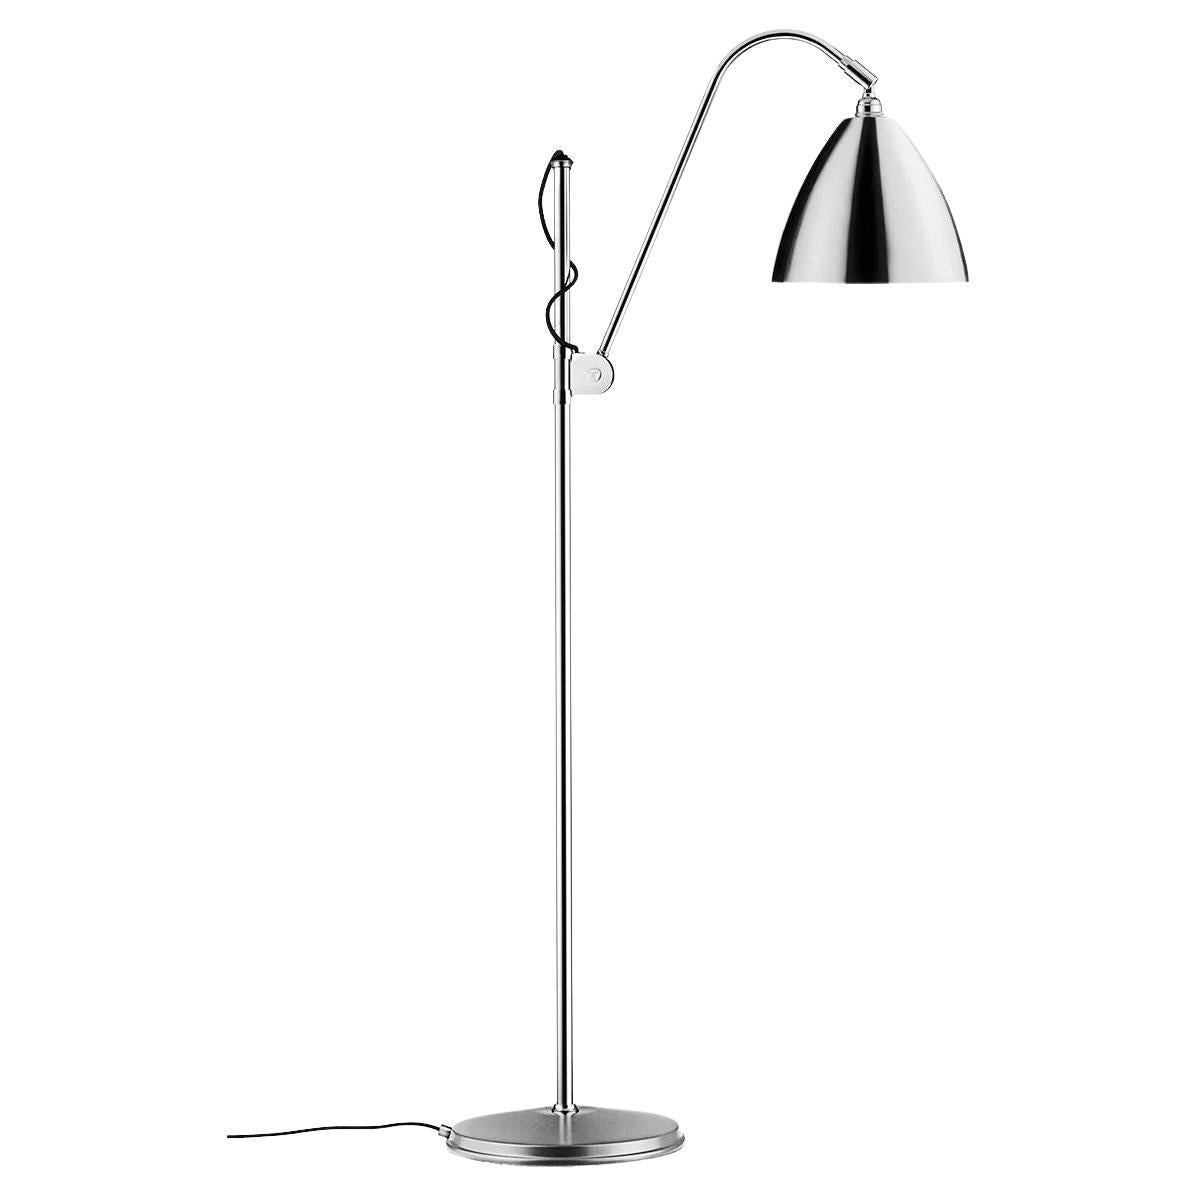 The Bestlite BL3 Floor Lamp in two sizes was designed in 1930 by Robert Dudley Best, a British designer highly influenced by Bauhaus. Its clean lines and elegant expression are combined with great functionality of the adjustable arm, both horizontal